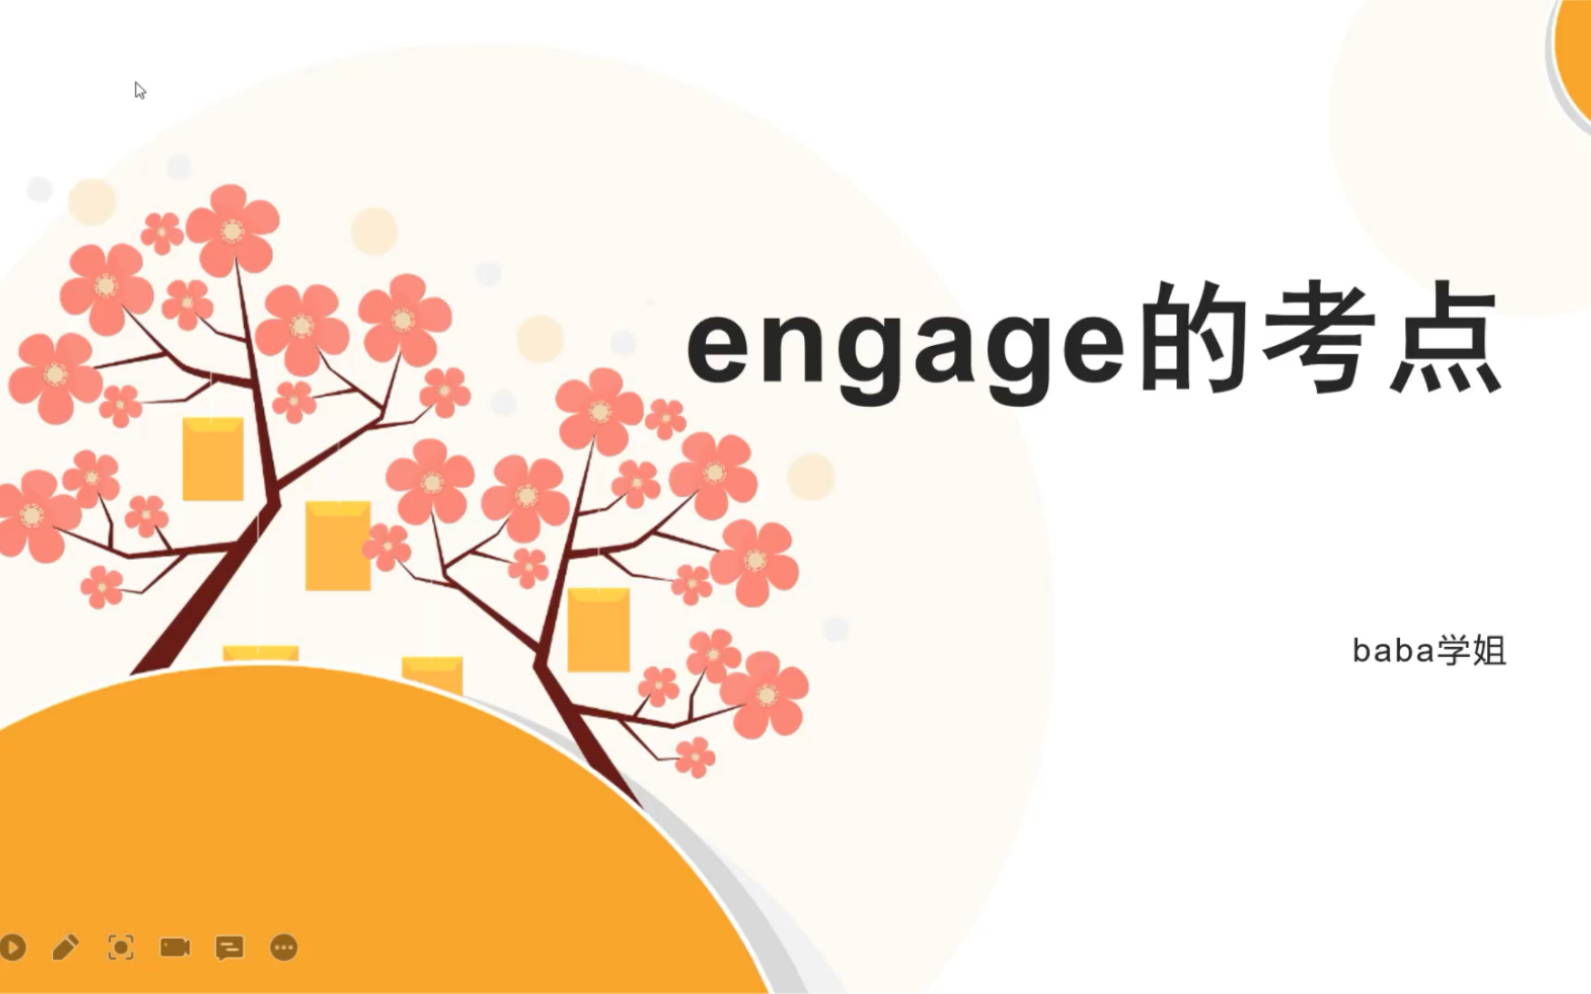 engage in/ with 不是订婚!